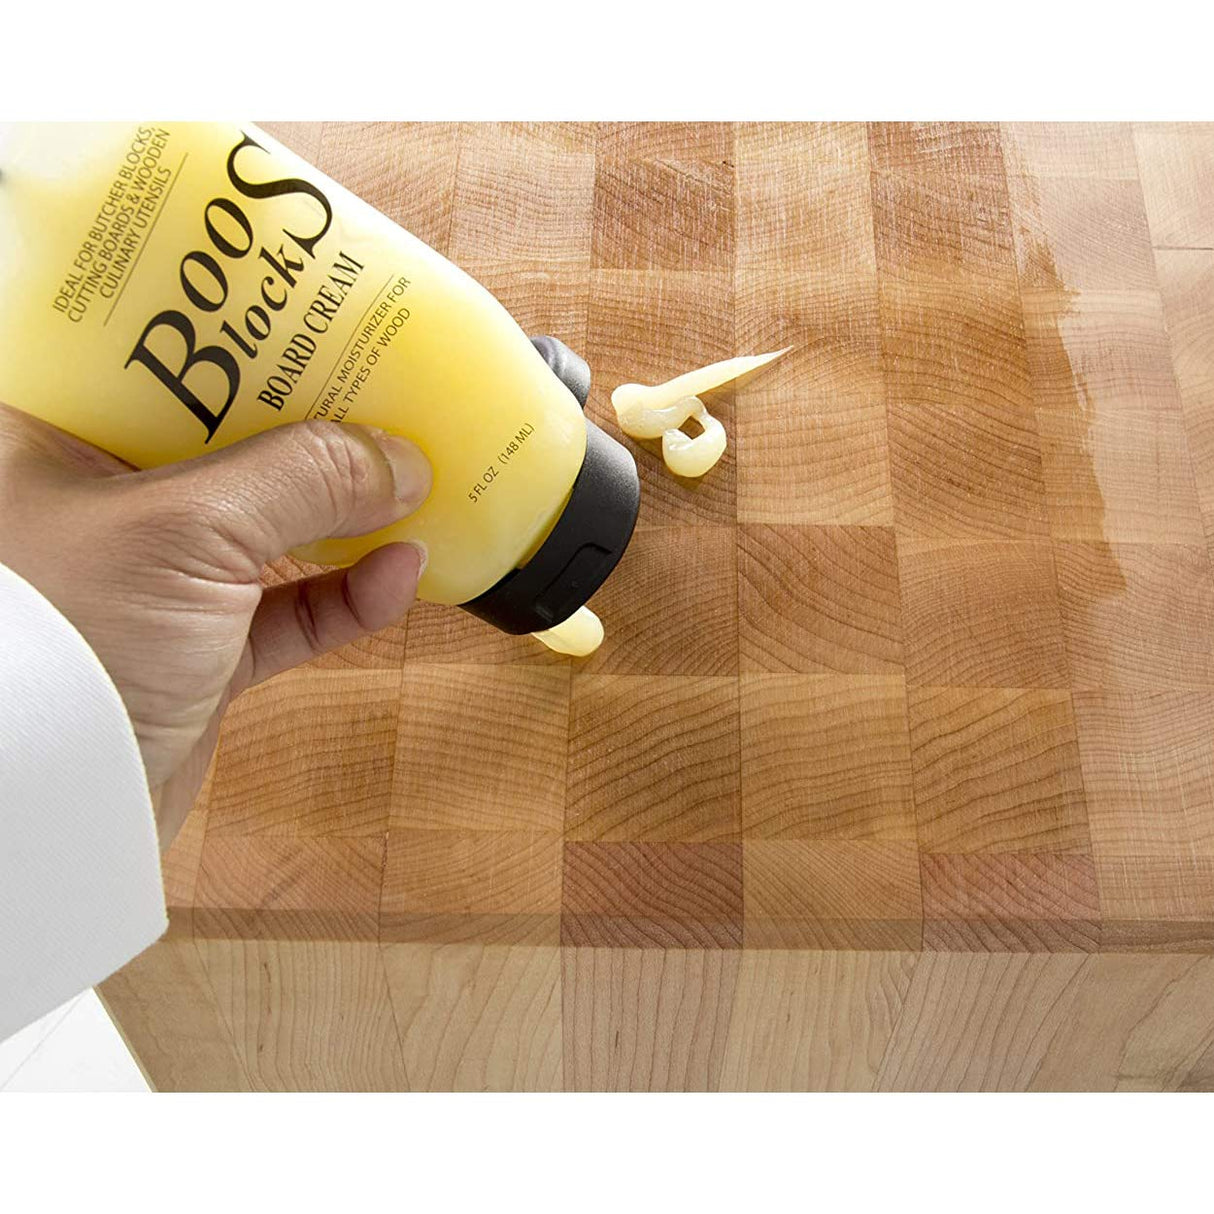 John Boos BWC-3 5 Oz All Natural Beeswax Moisture Cream for Wood Cutting Boards, Chopping Block & Countertops, Food Safe Charcuterie Essential (3 Pack) BOOS BEESWAX CREAM-3 PACK